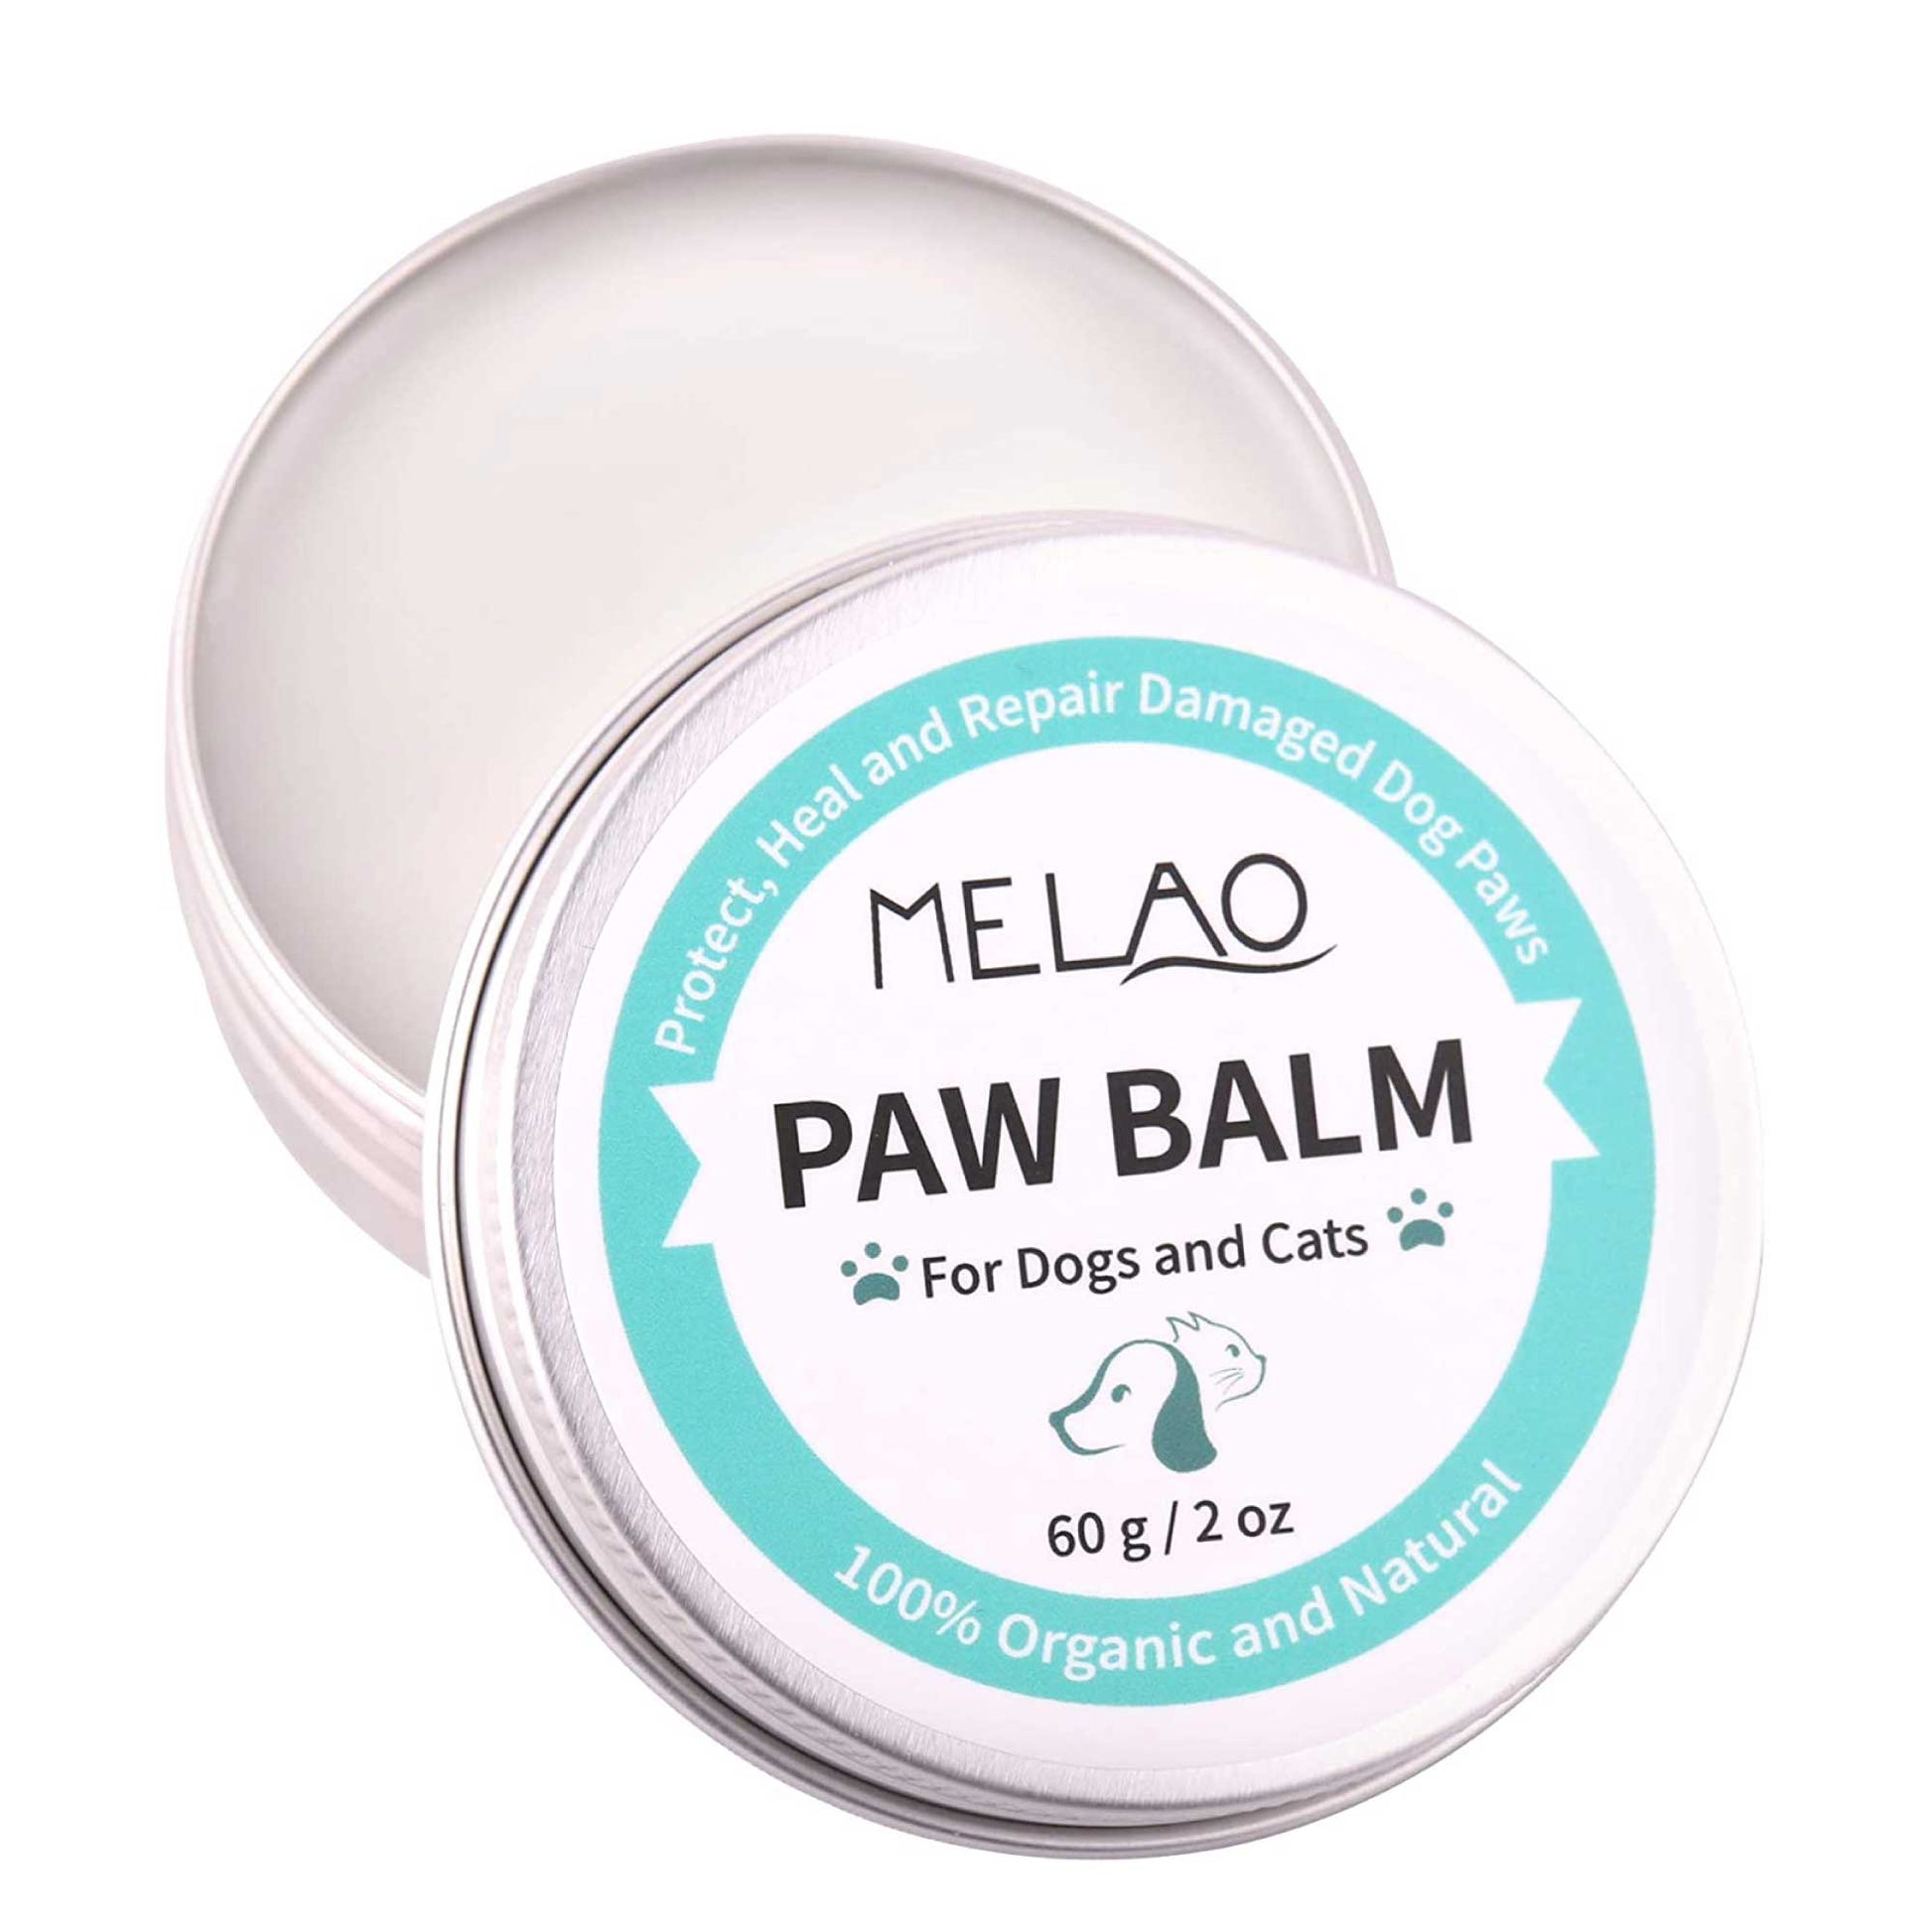 60g Pet Paw Balm - Dog or Cat Natural Organic Nose Soother Wax Ointment Cream